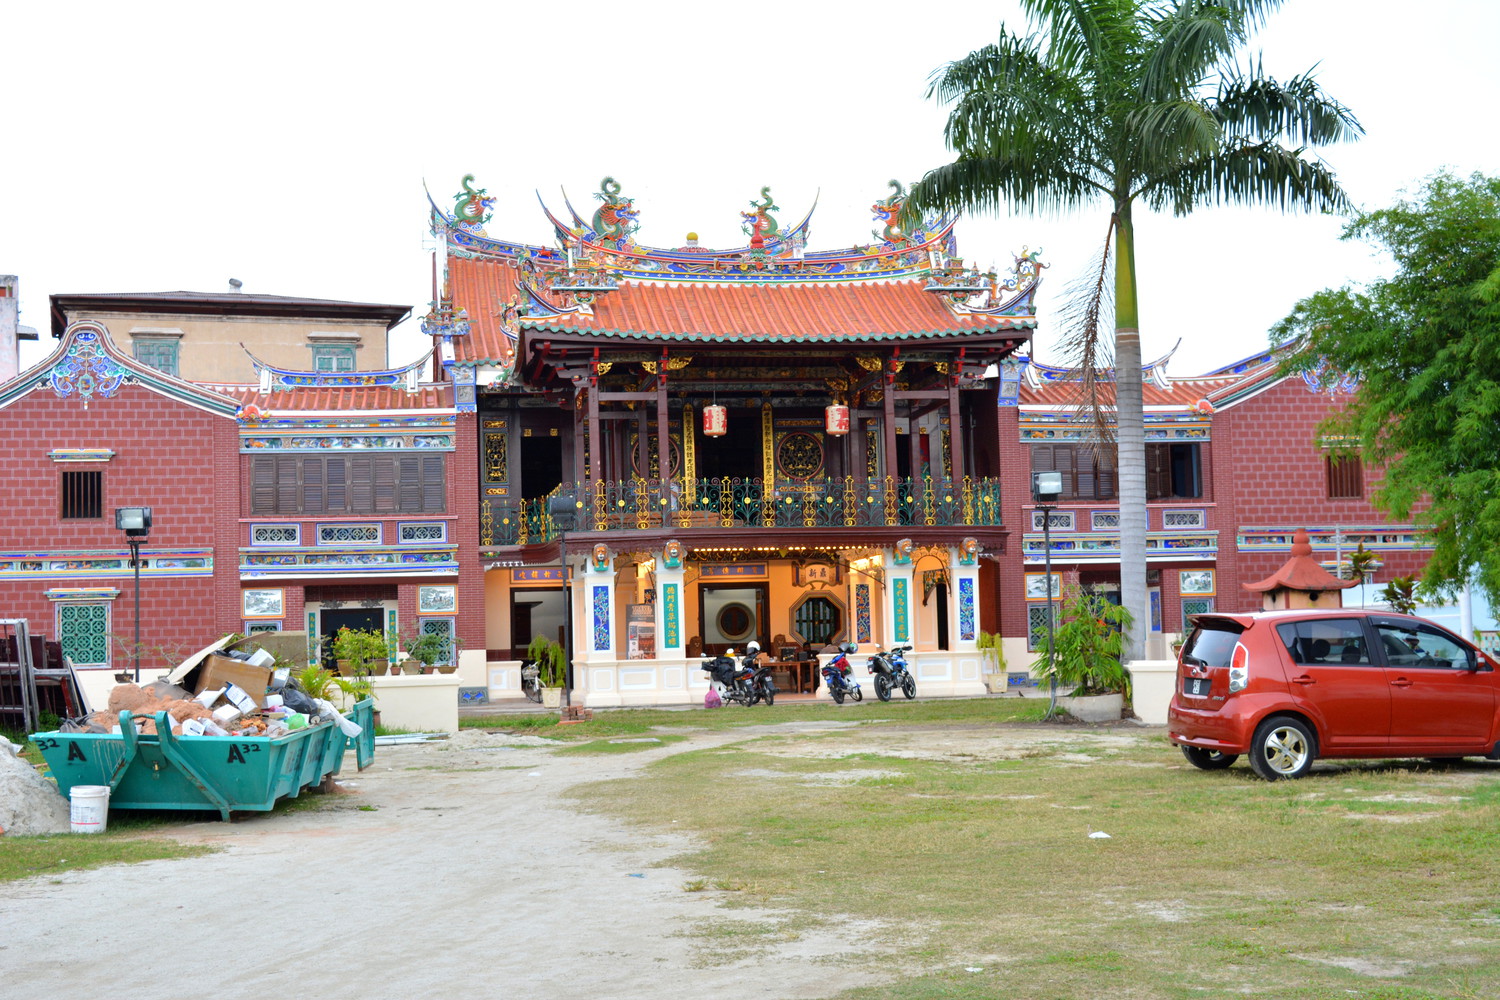 A two storey building with Chinese architecture